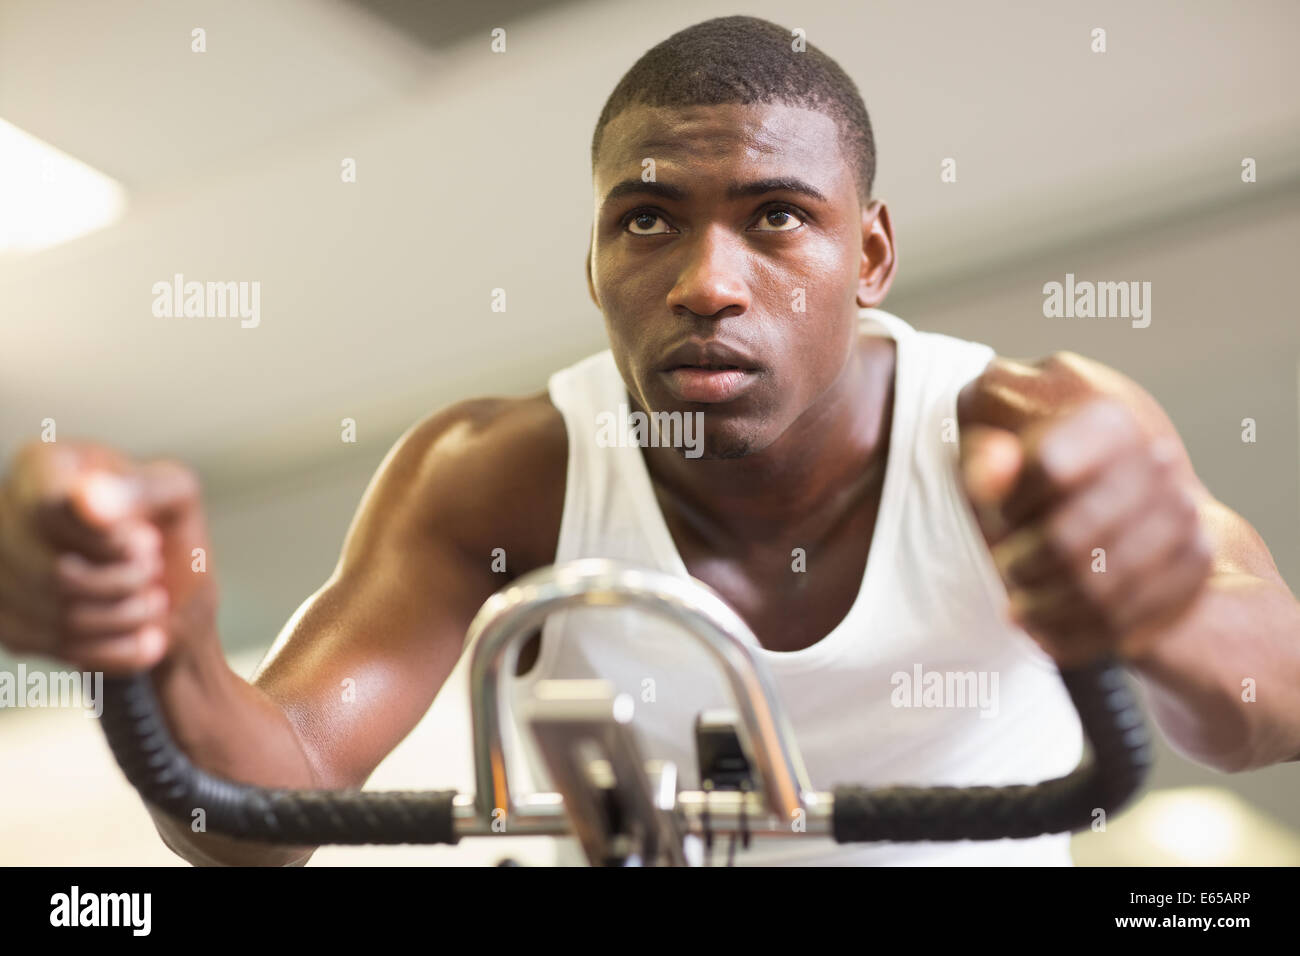 Determined man working out on exercise bike at gym Stock Photo